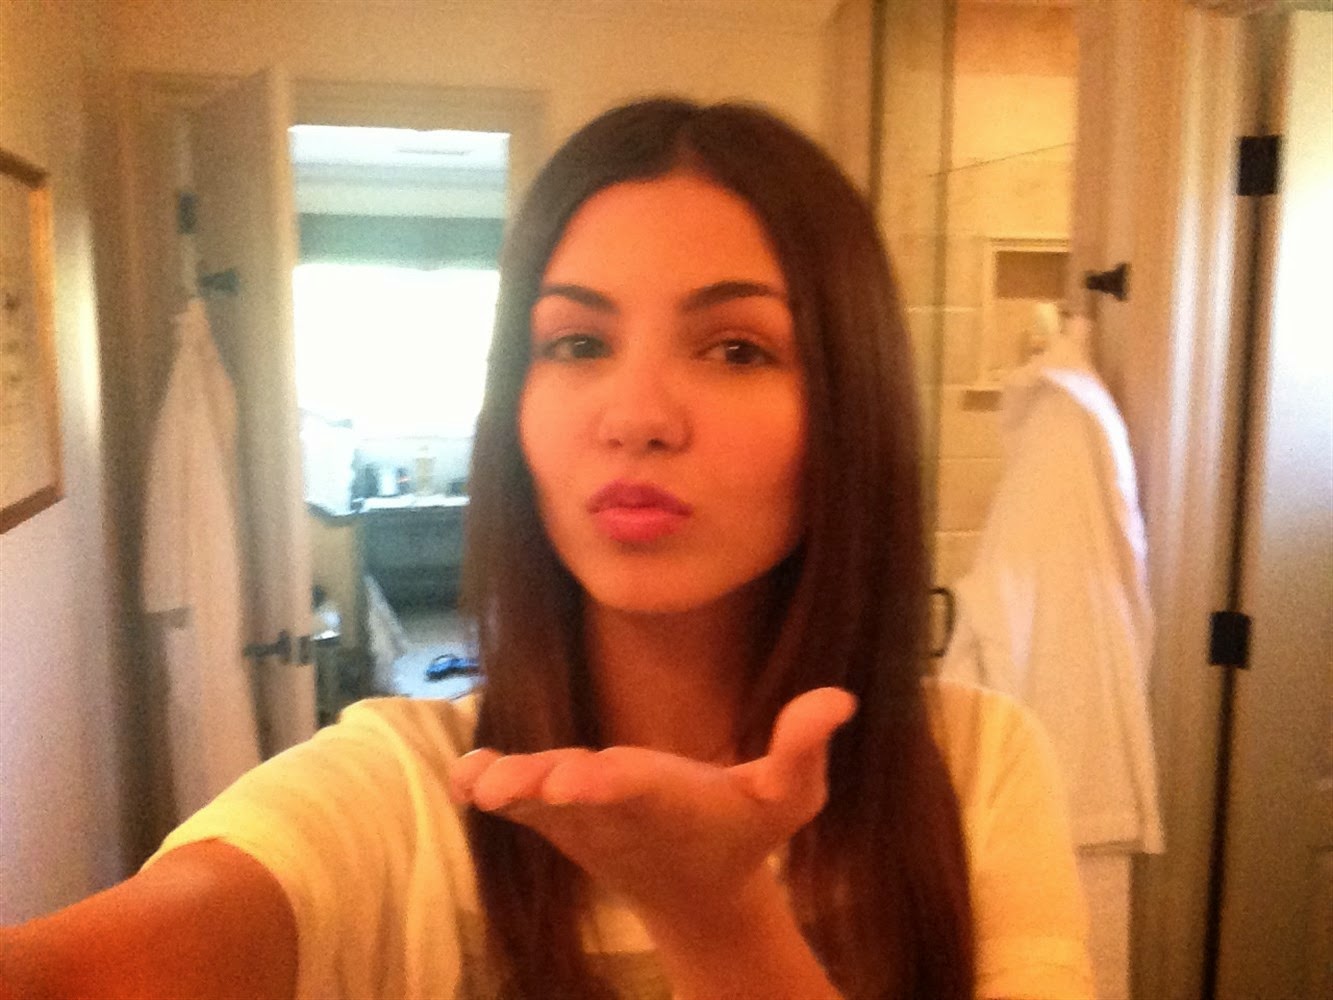 Victoria Justice Leaked Nude Photos